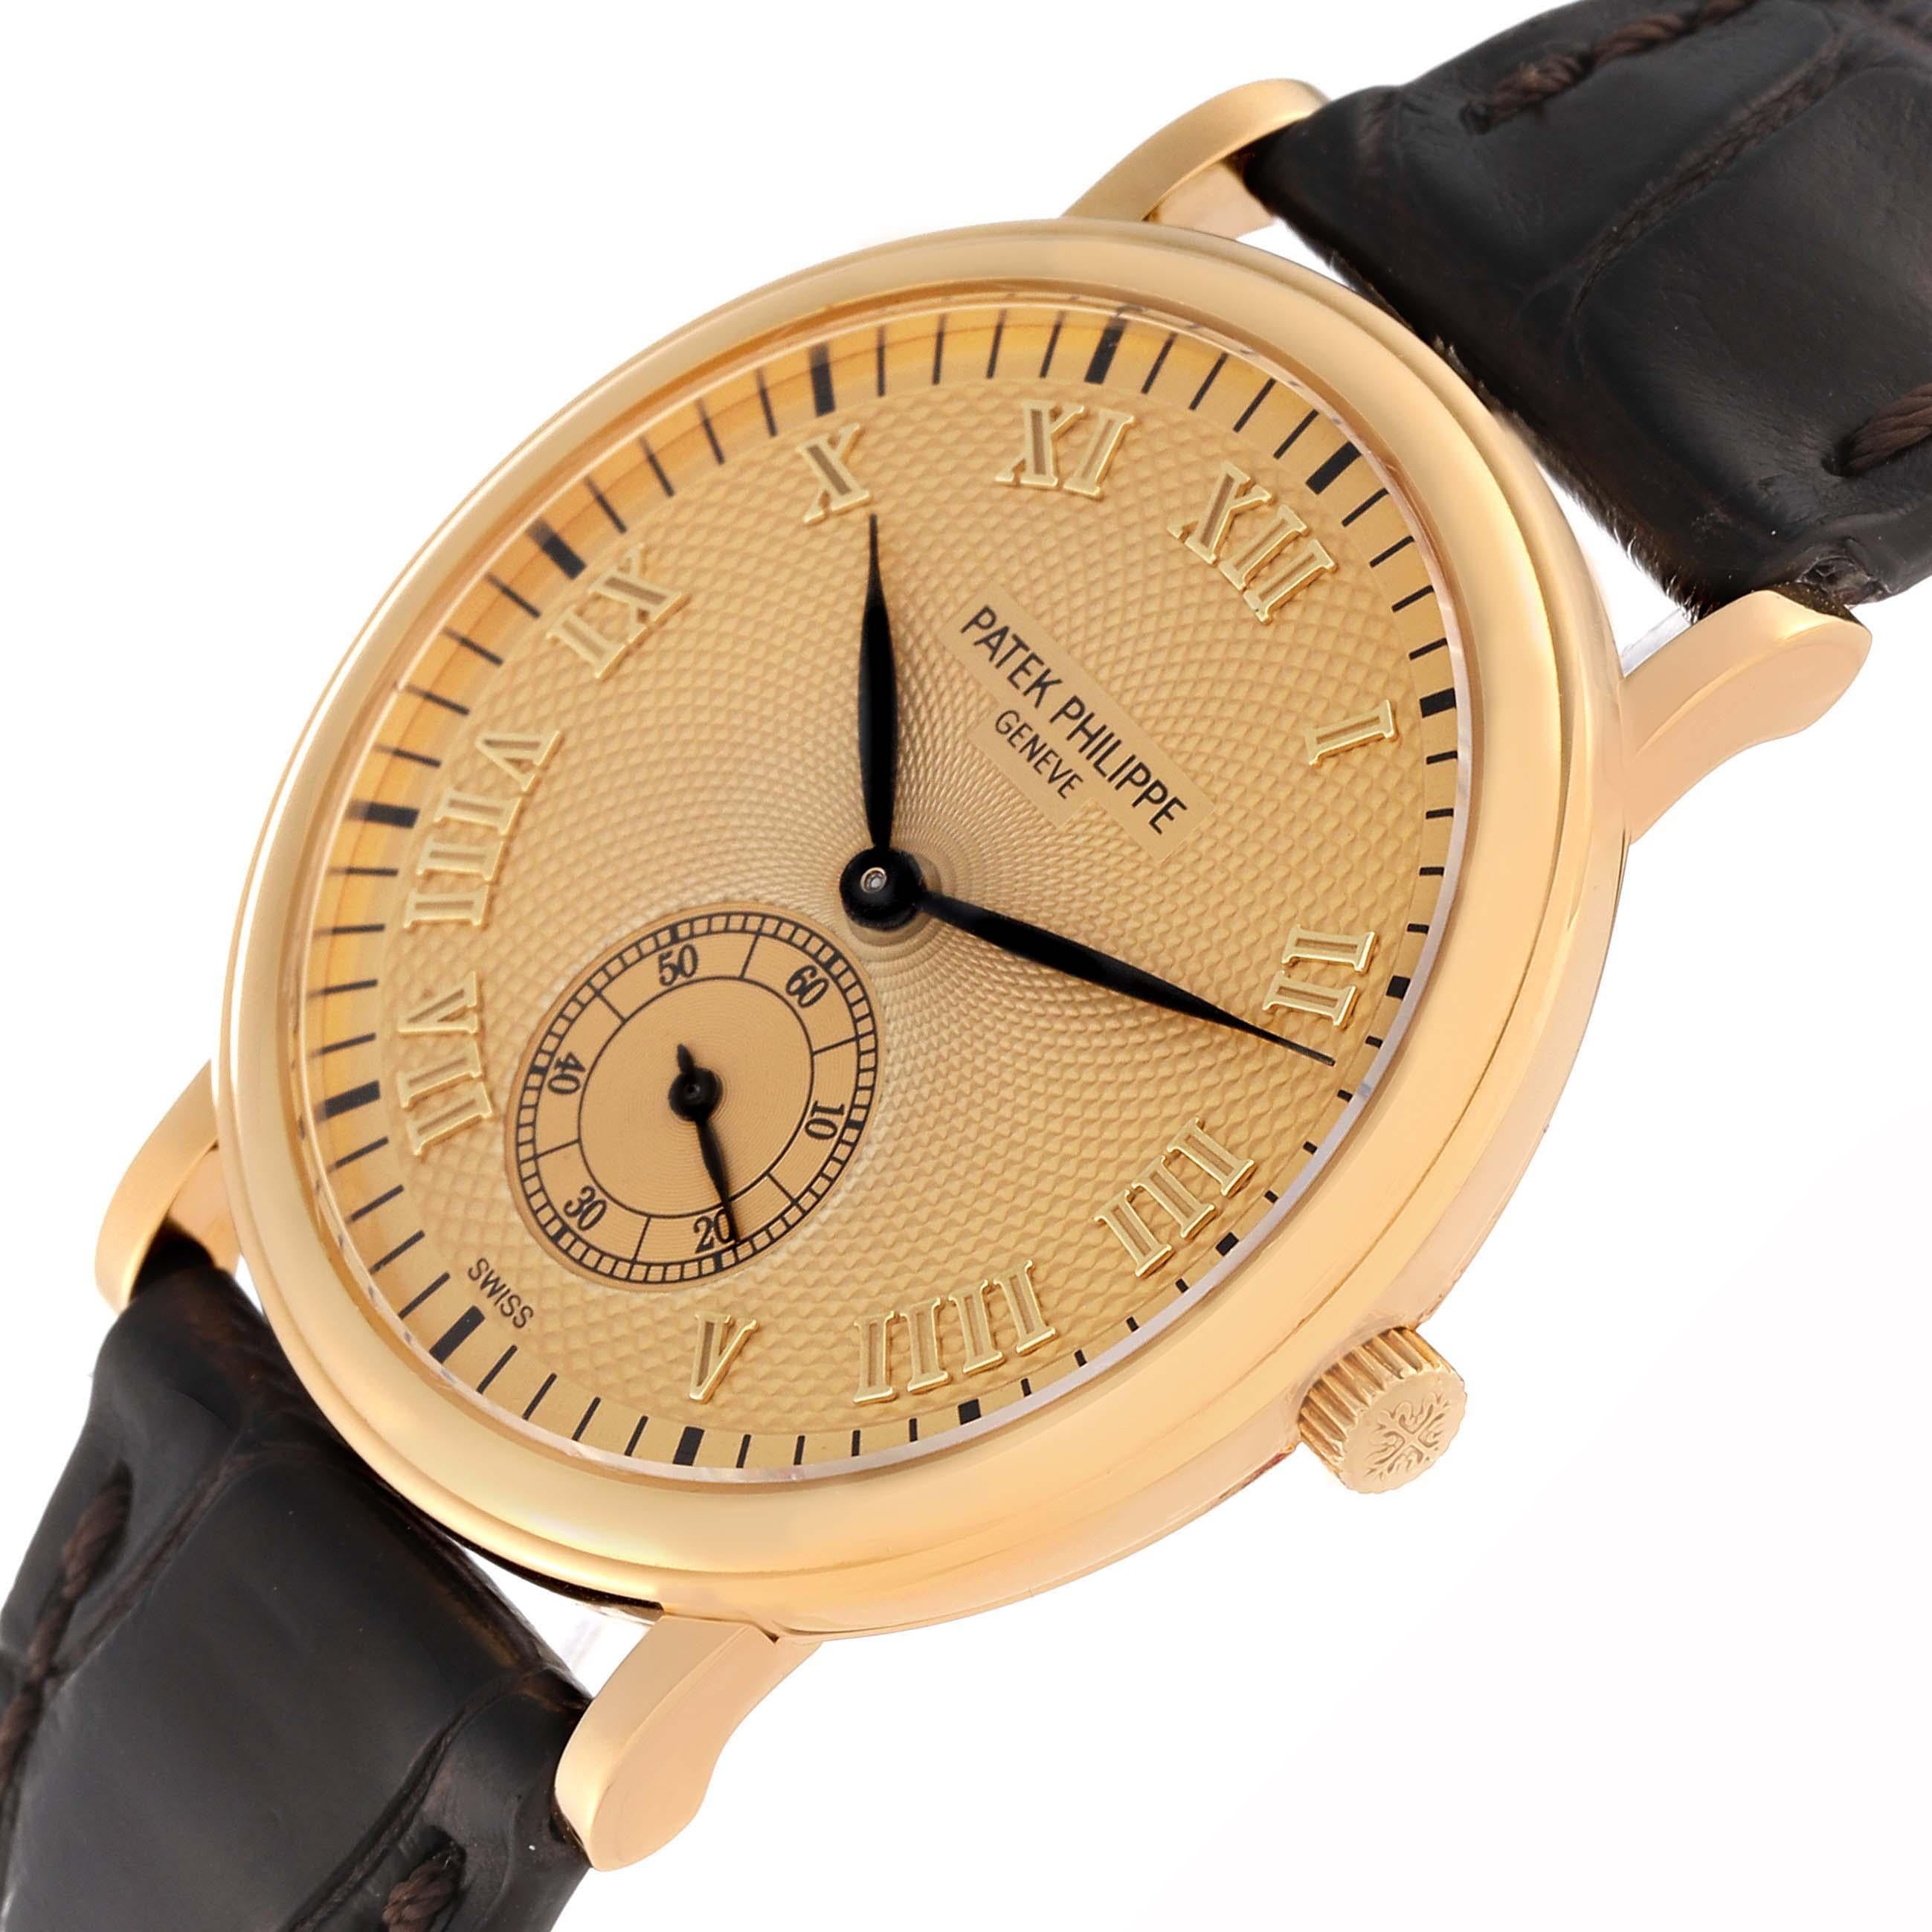 Patek Philippe Calatrava Officier Champagne Dial Yellow Gold Mens Watch 5022 In Excellent Condition For Sale In Atlanta, GA